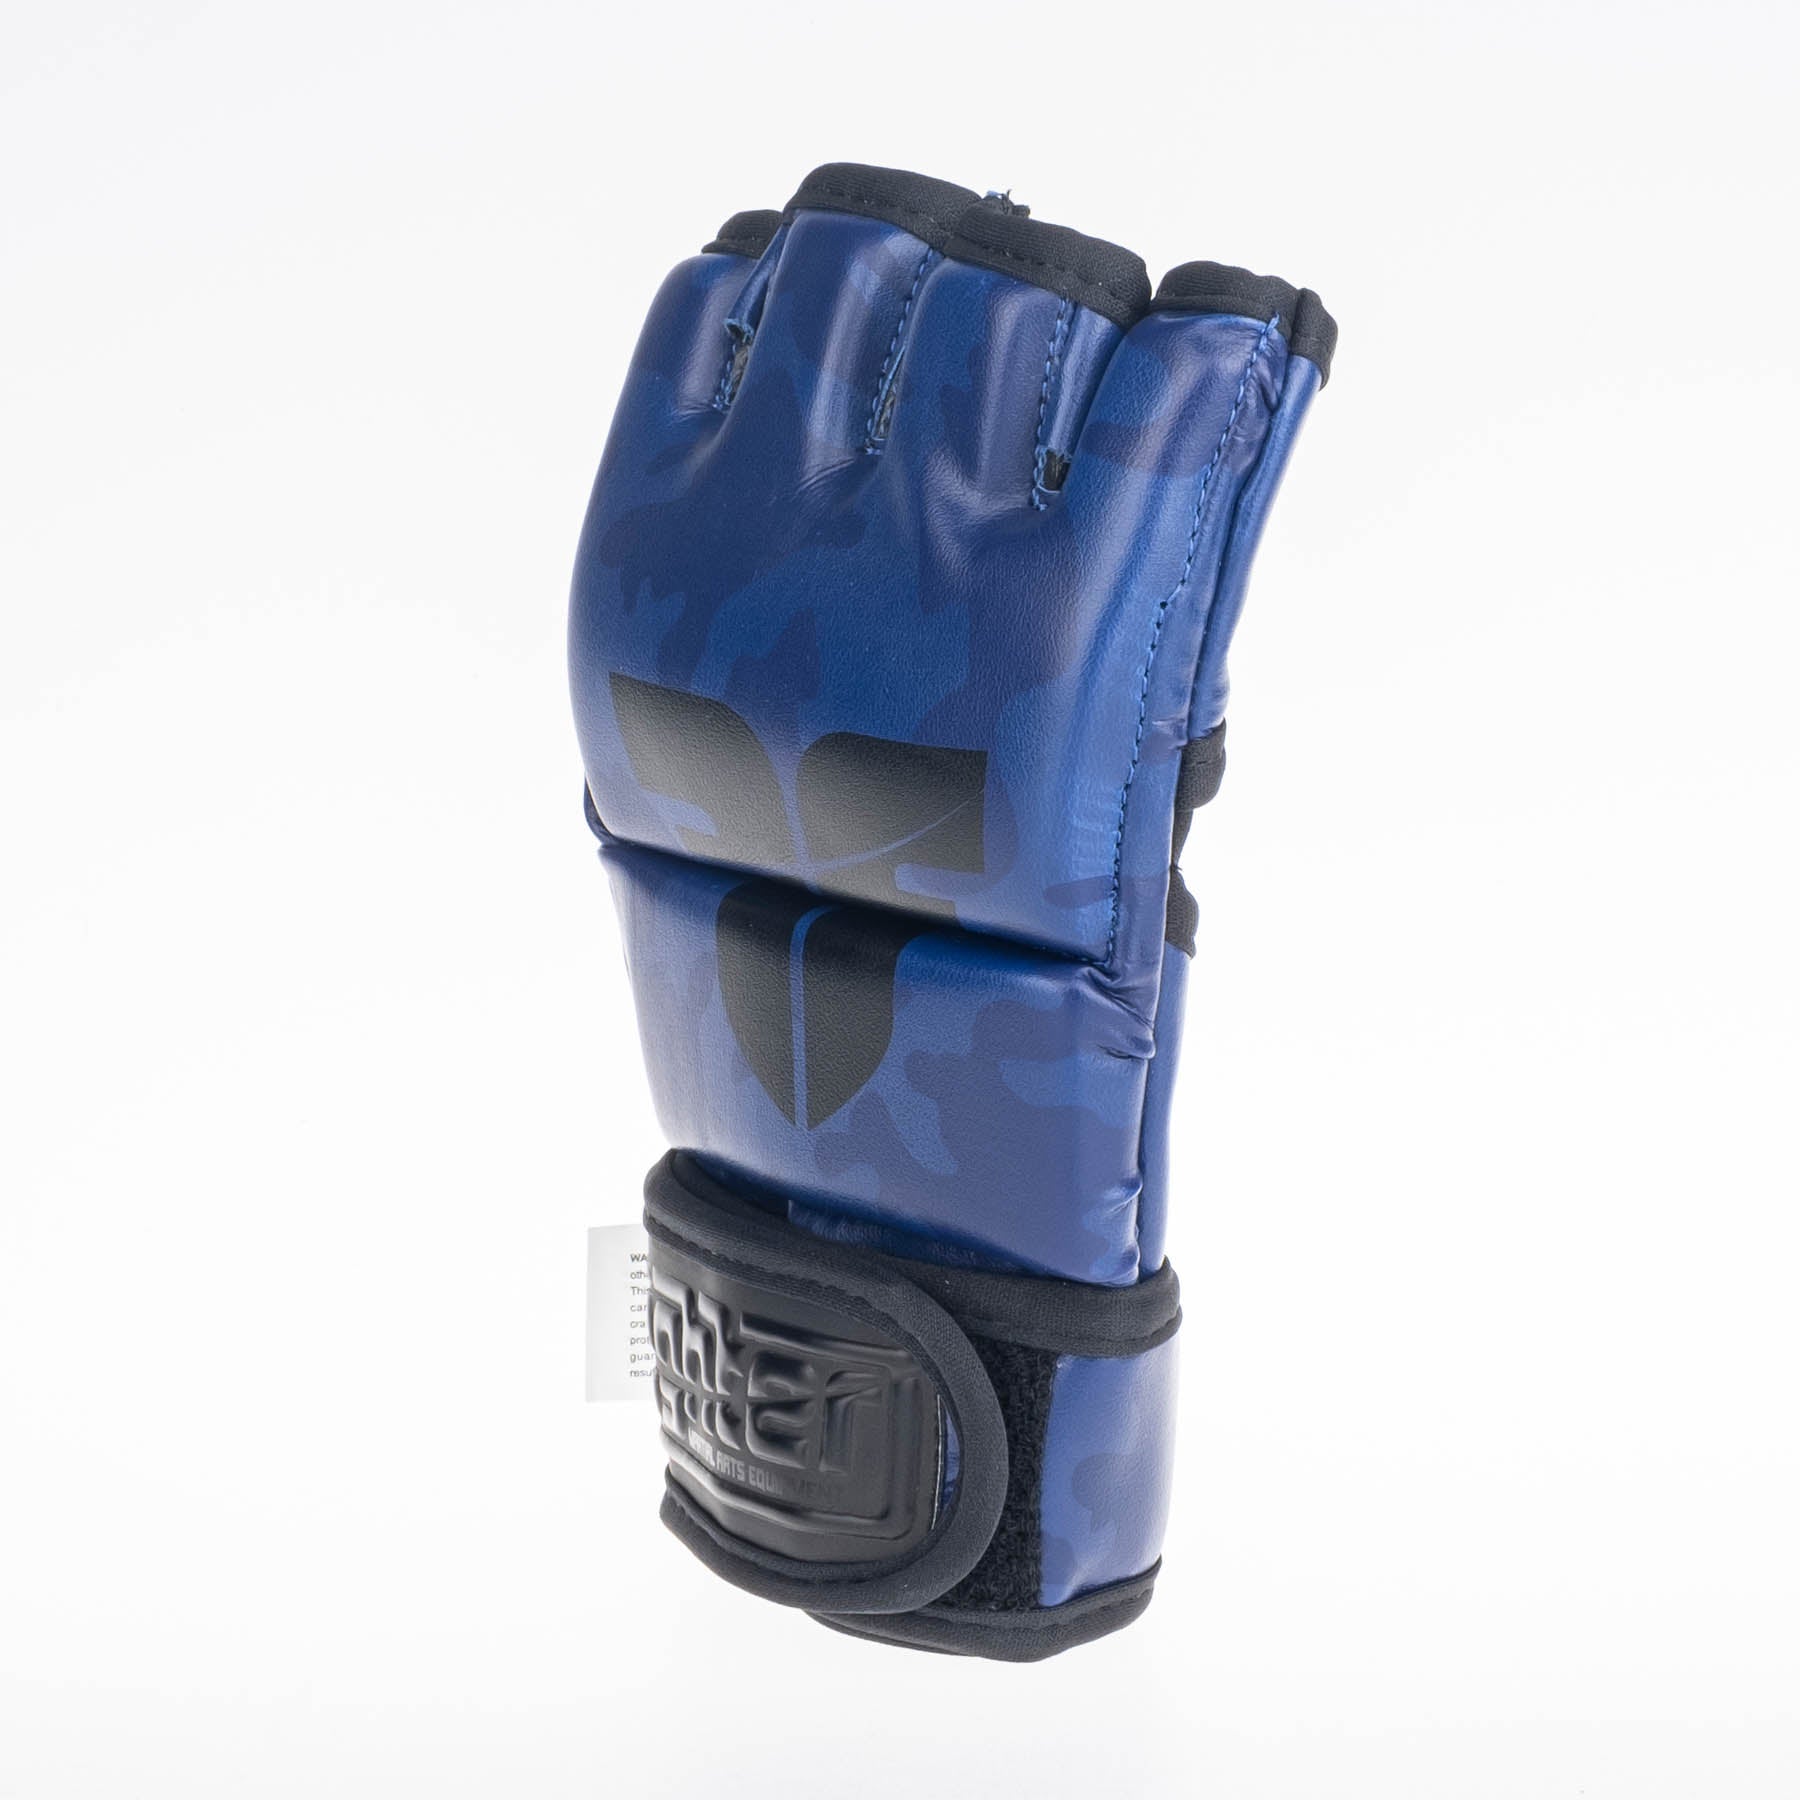 Fighter MMA Gloves Competition - blue camo